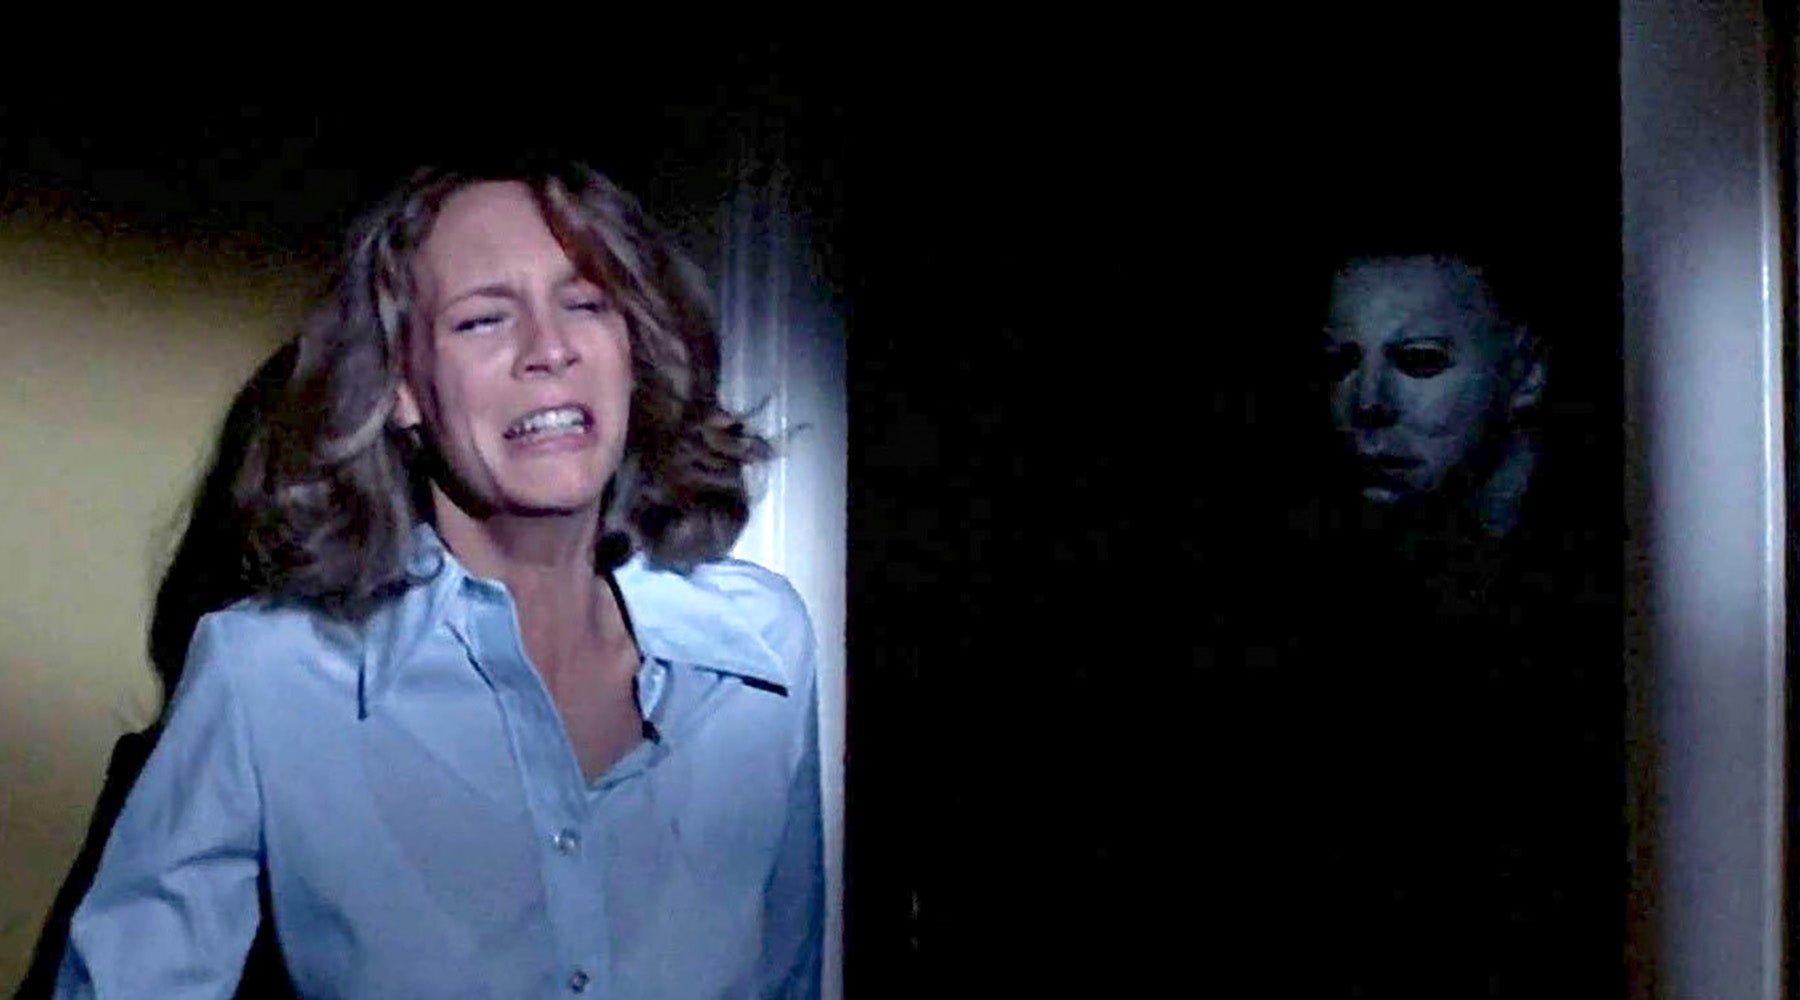 The Halloween Franchise: Why We Love It